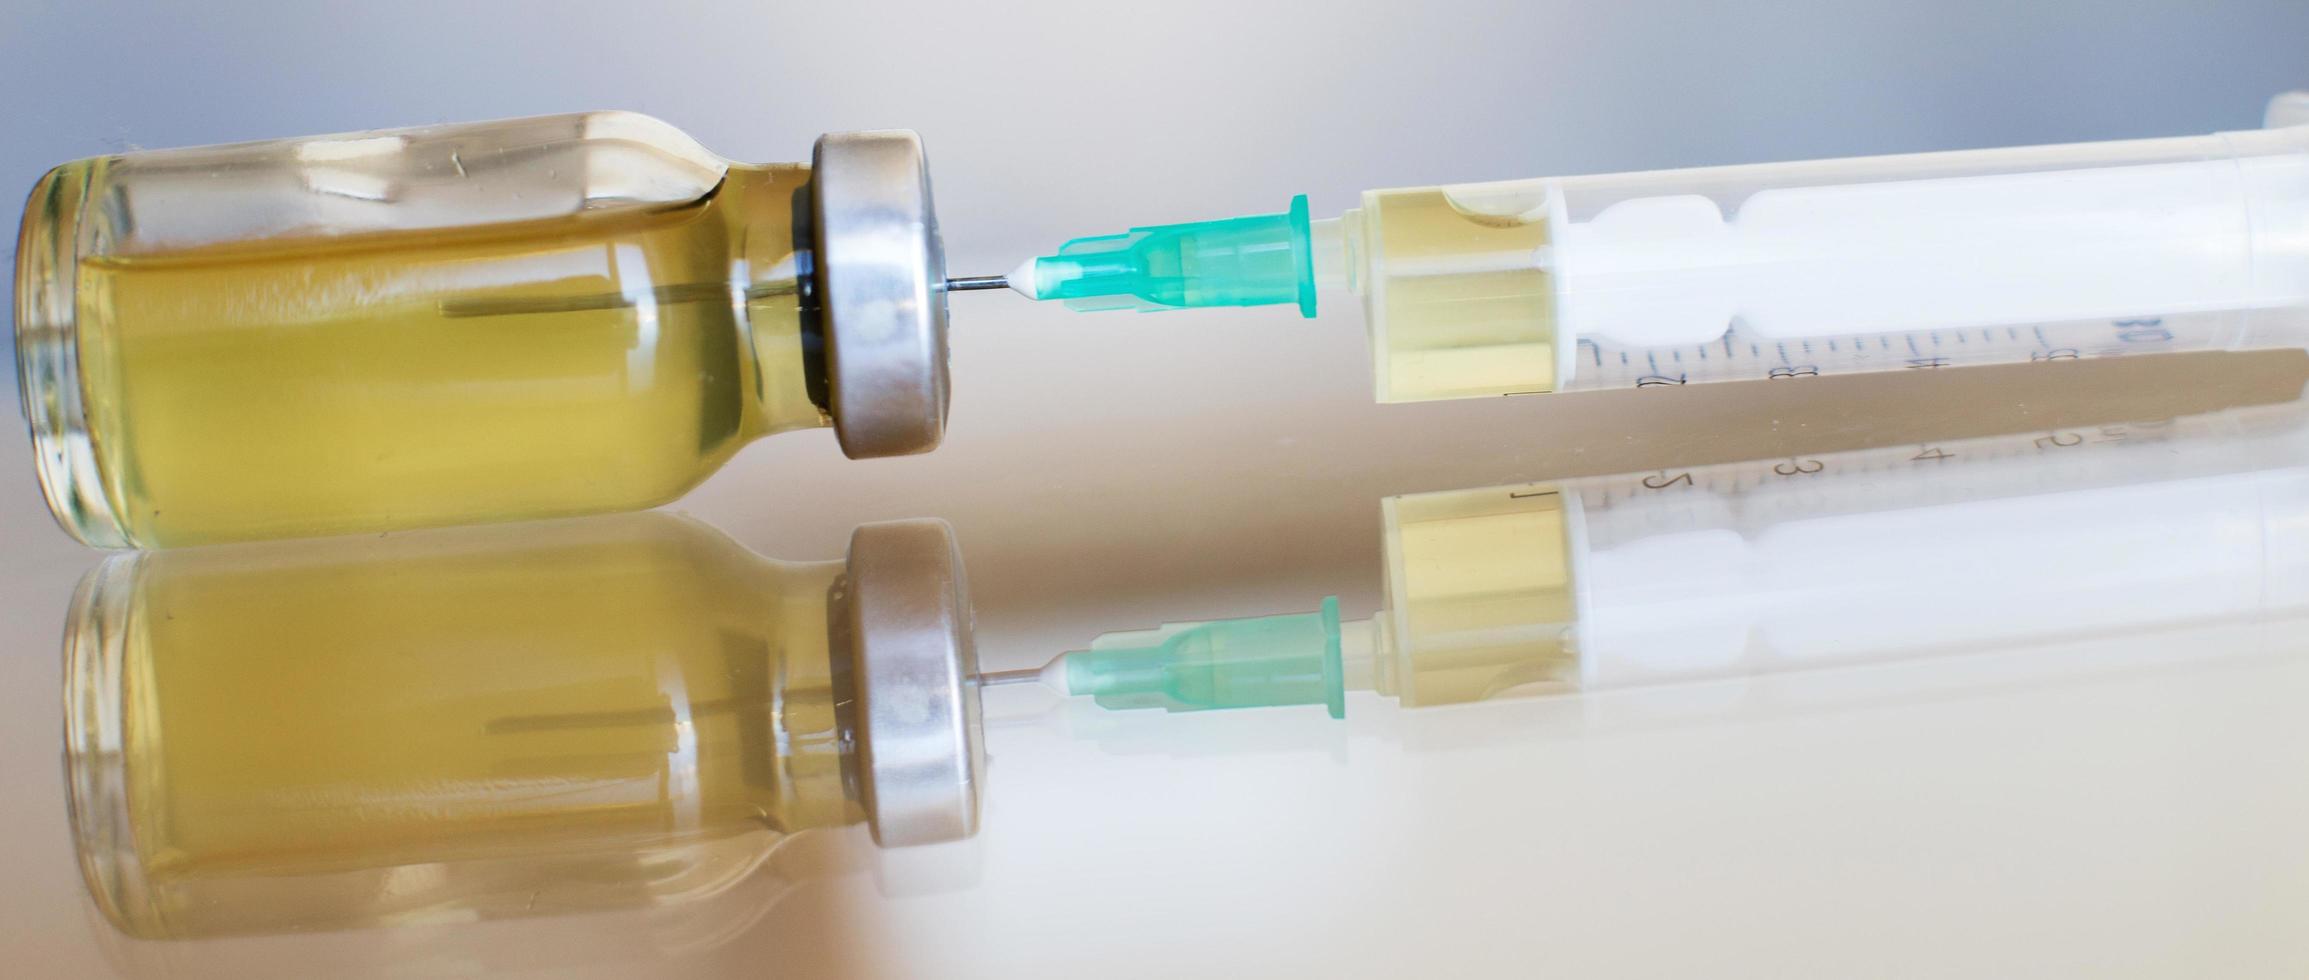 Vial filled with liquid vaccine in medical lab with syringe. medical ampoule and syringe on the glass surface. banner photo